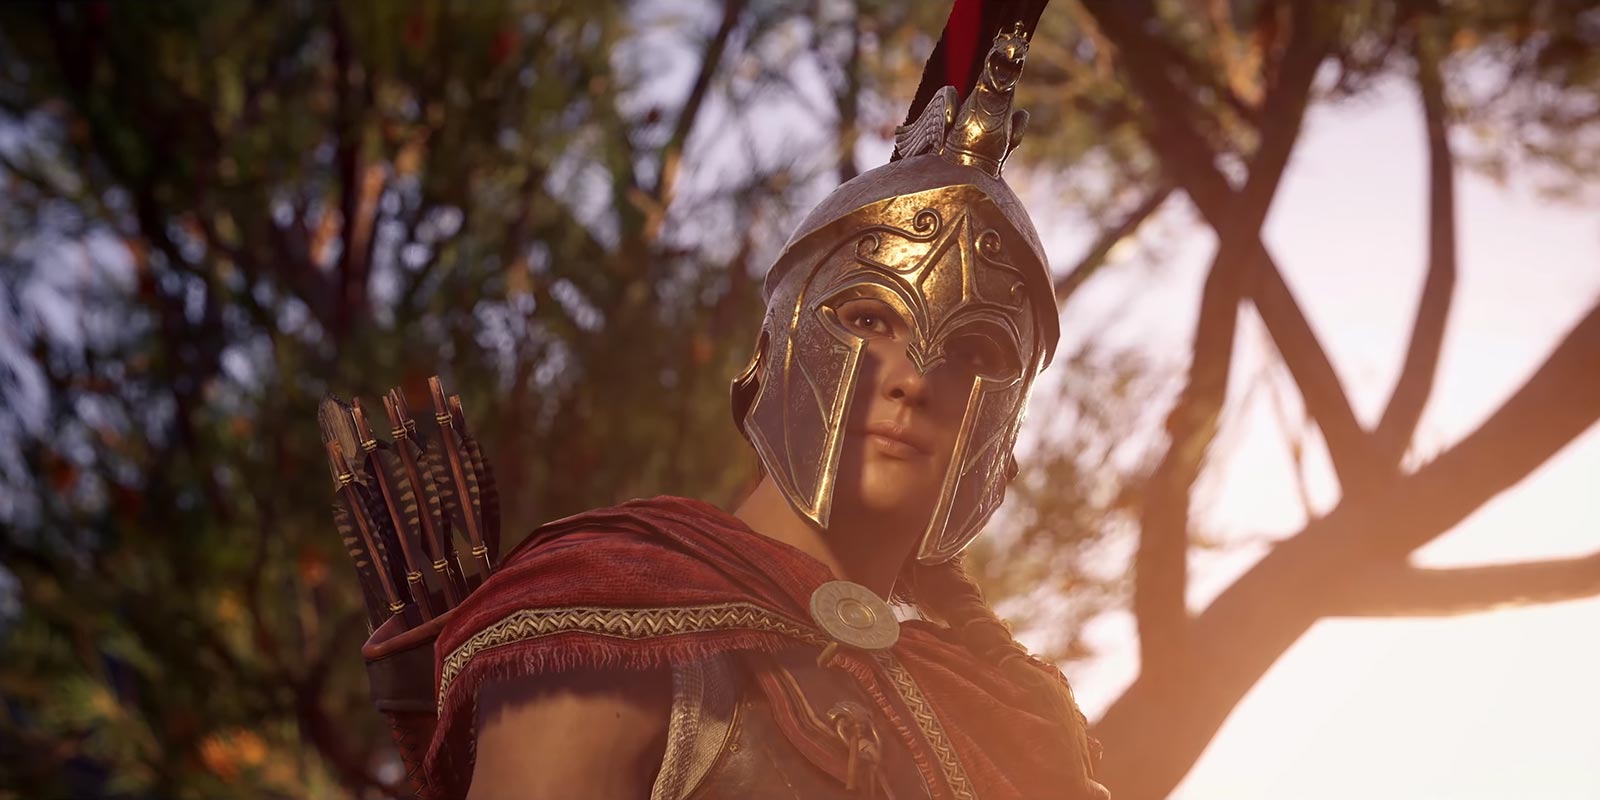 PlayStation - Assassin Creed Odyssey's Kassandra is coming